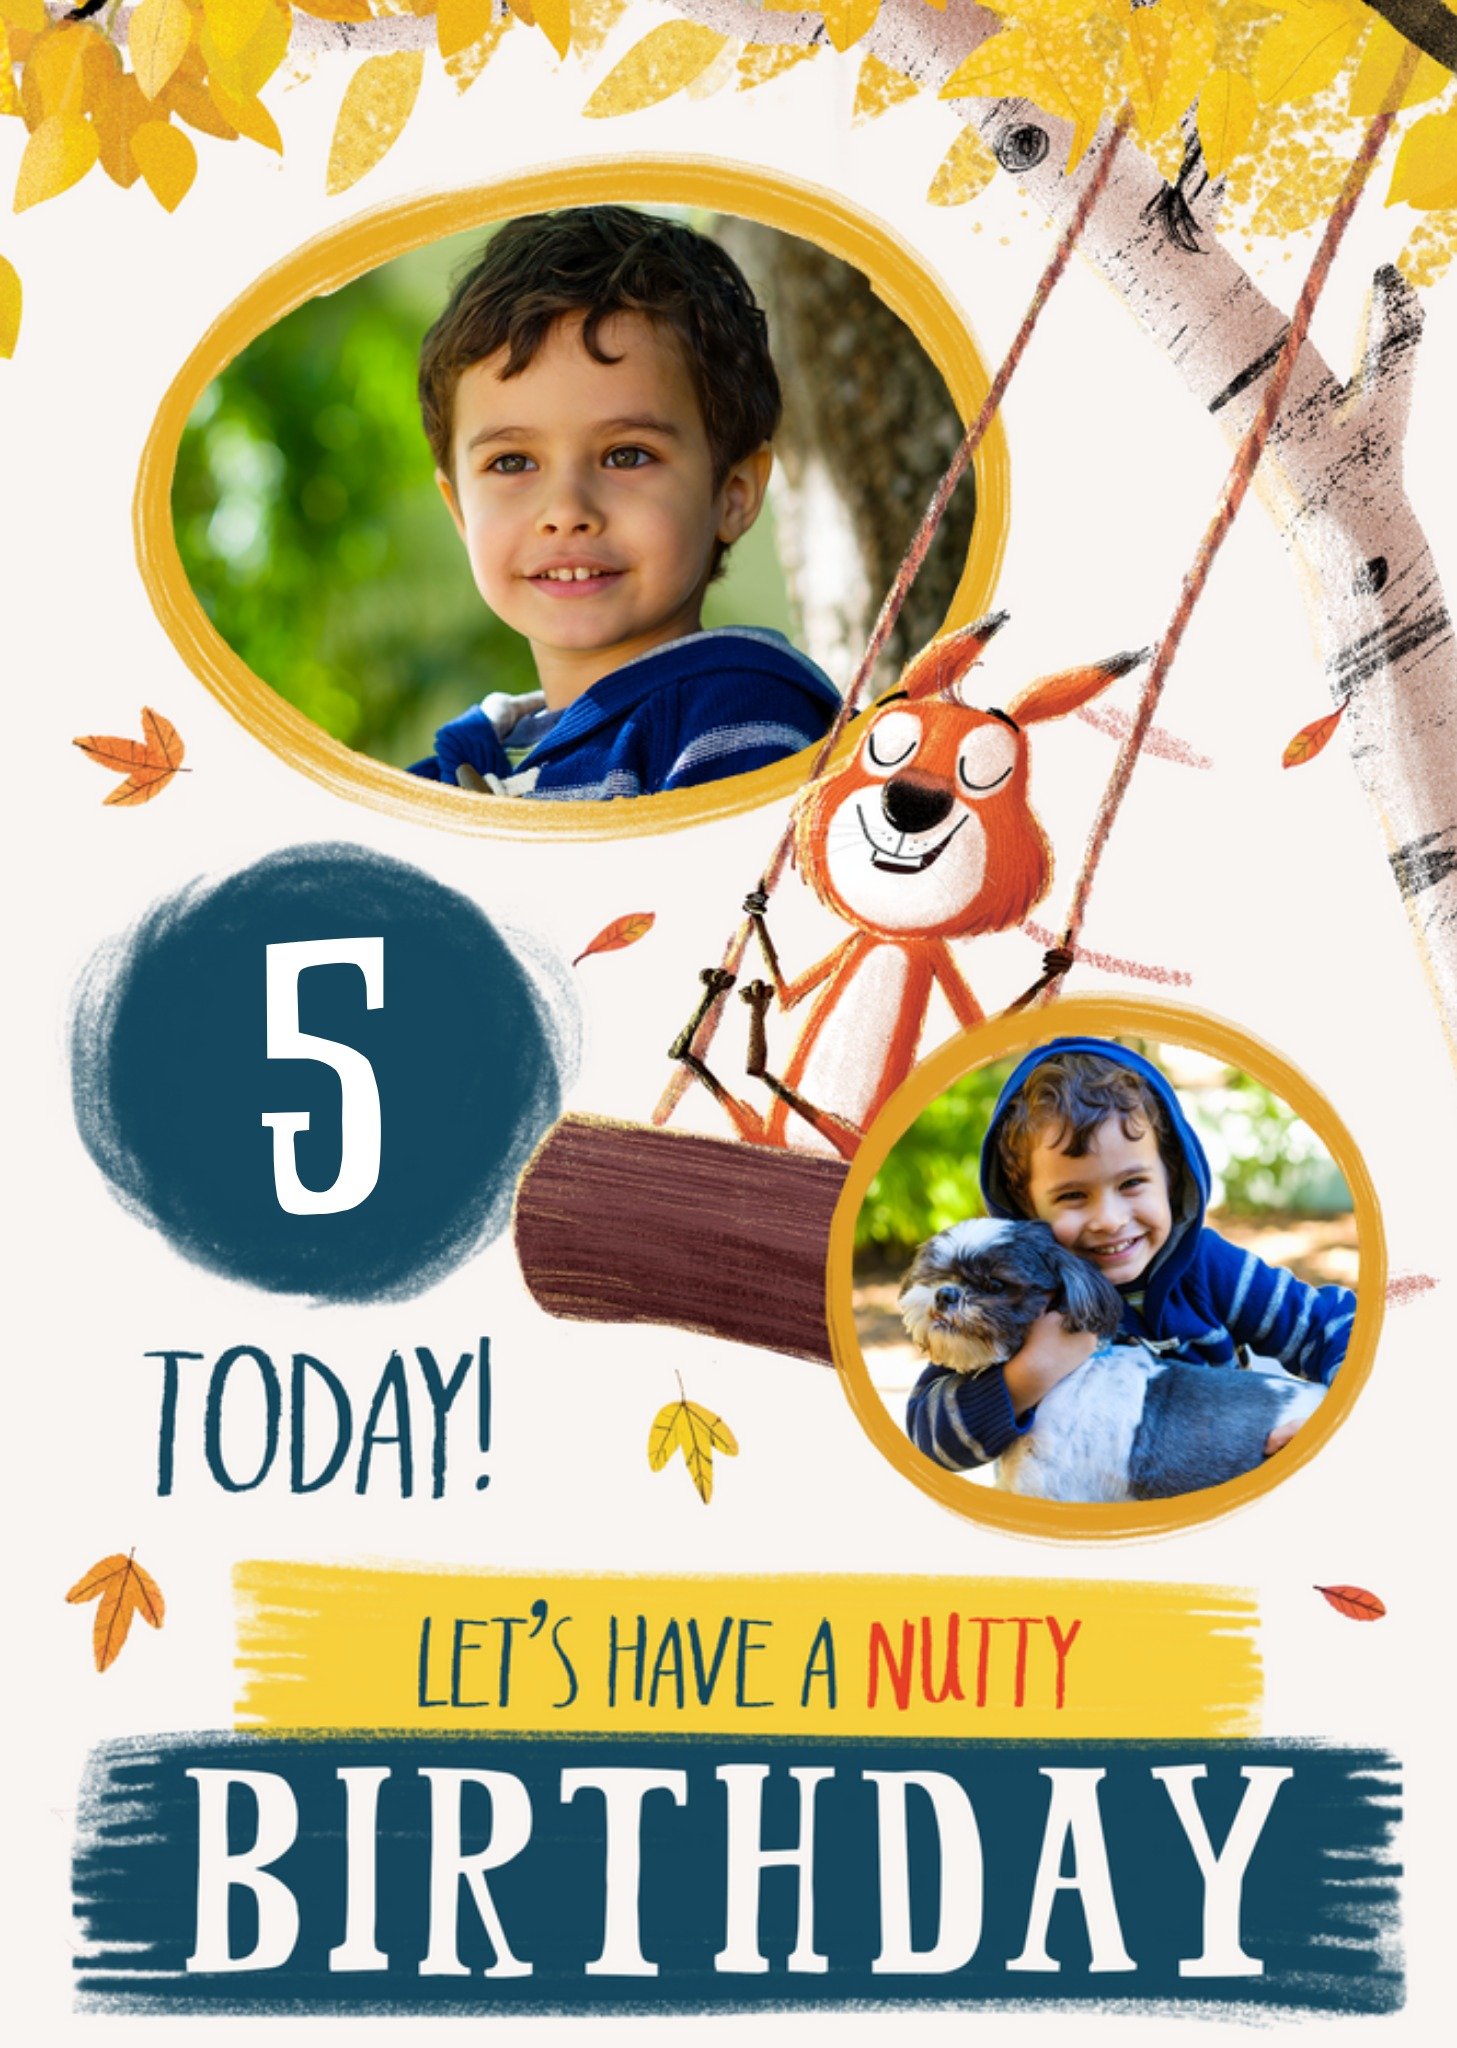 Moonpig Let's Have A Nutty Birthday 5 Today Illustrated Squirrel On A Swing Photo Upload Birthday Ca